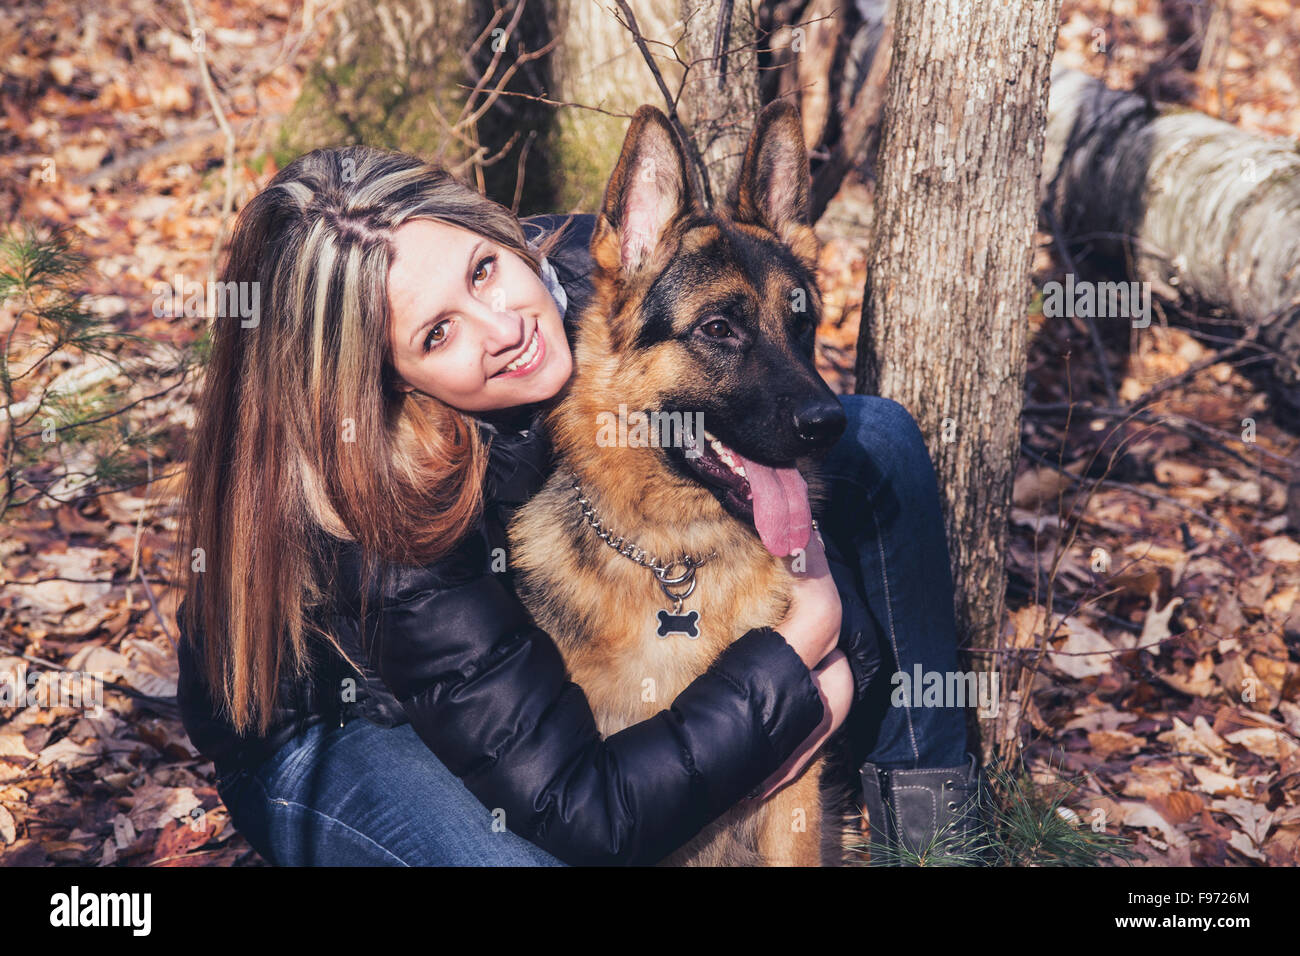 Young woman smiling with a german shepherd dog outdoor in the forest Stock Photo